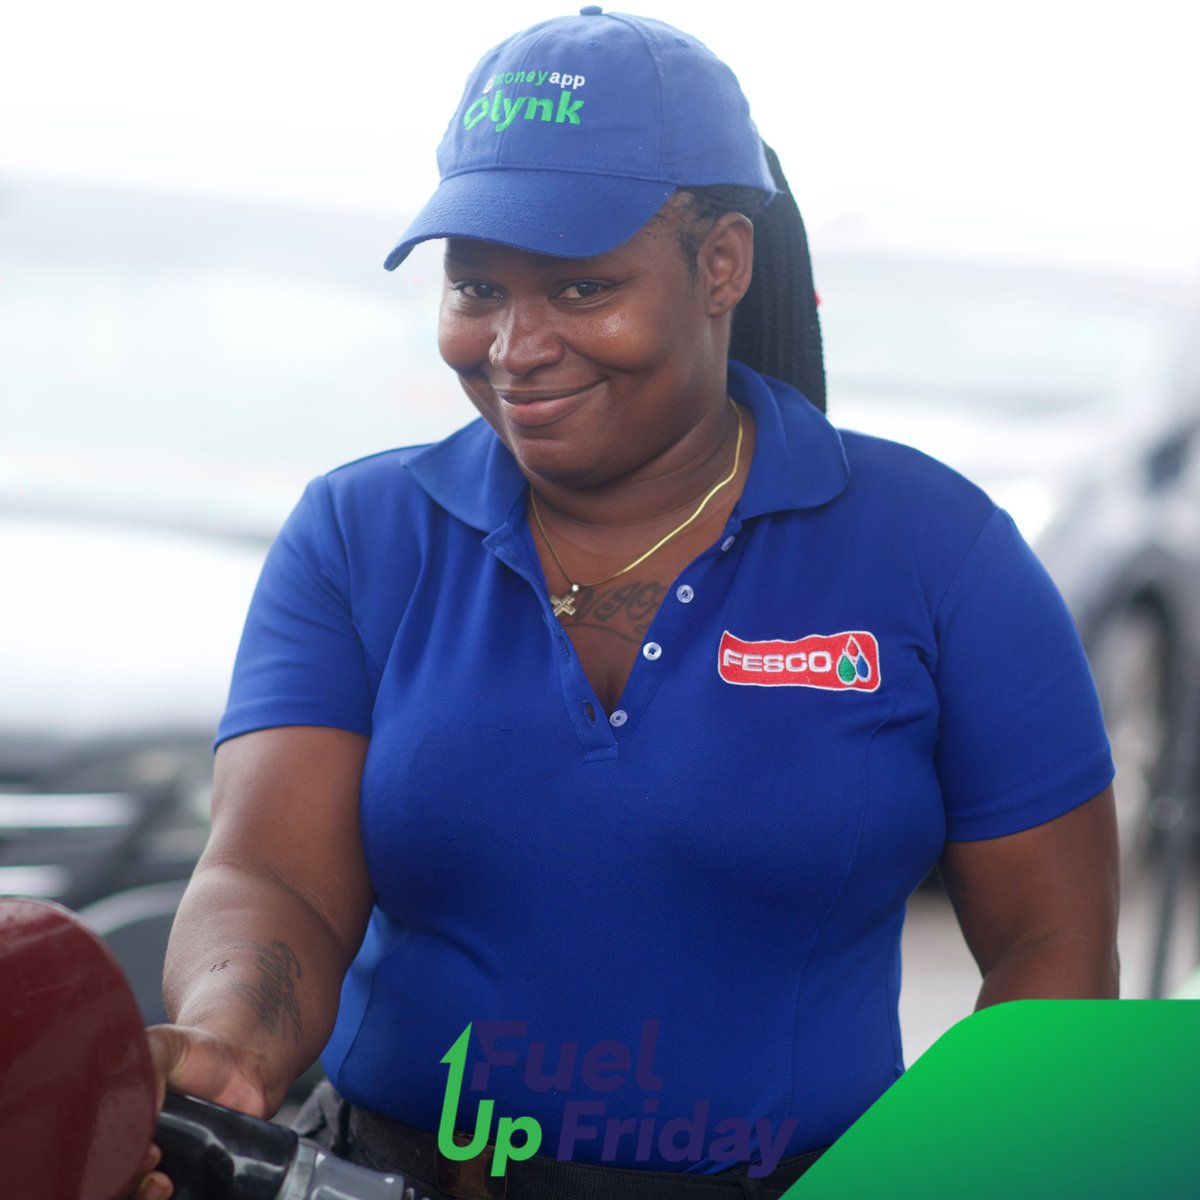 Get your #FuelUp with Lynk #FuelUpFridays at participating locations:

📍Fesco Beechwood 
📍Fesco Heaven 
📍Fesco Bodles
📍Fesco Braeton

Offer has been extended to June 2nd, 9th and 16th between 10am and 6pm.
#LynkJamaica #FuelUp